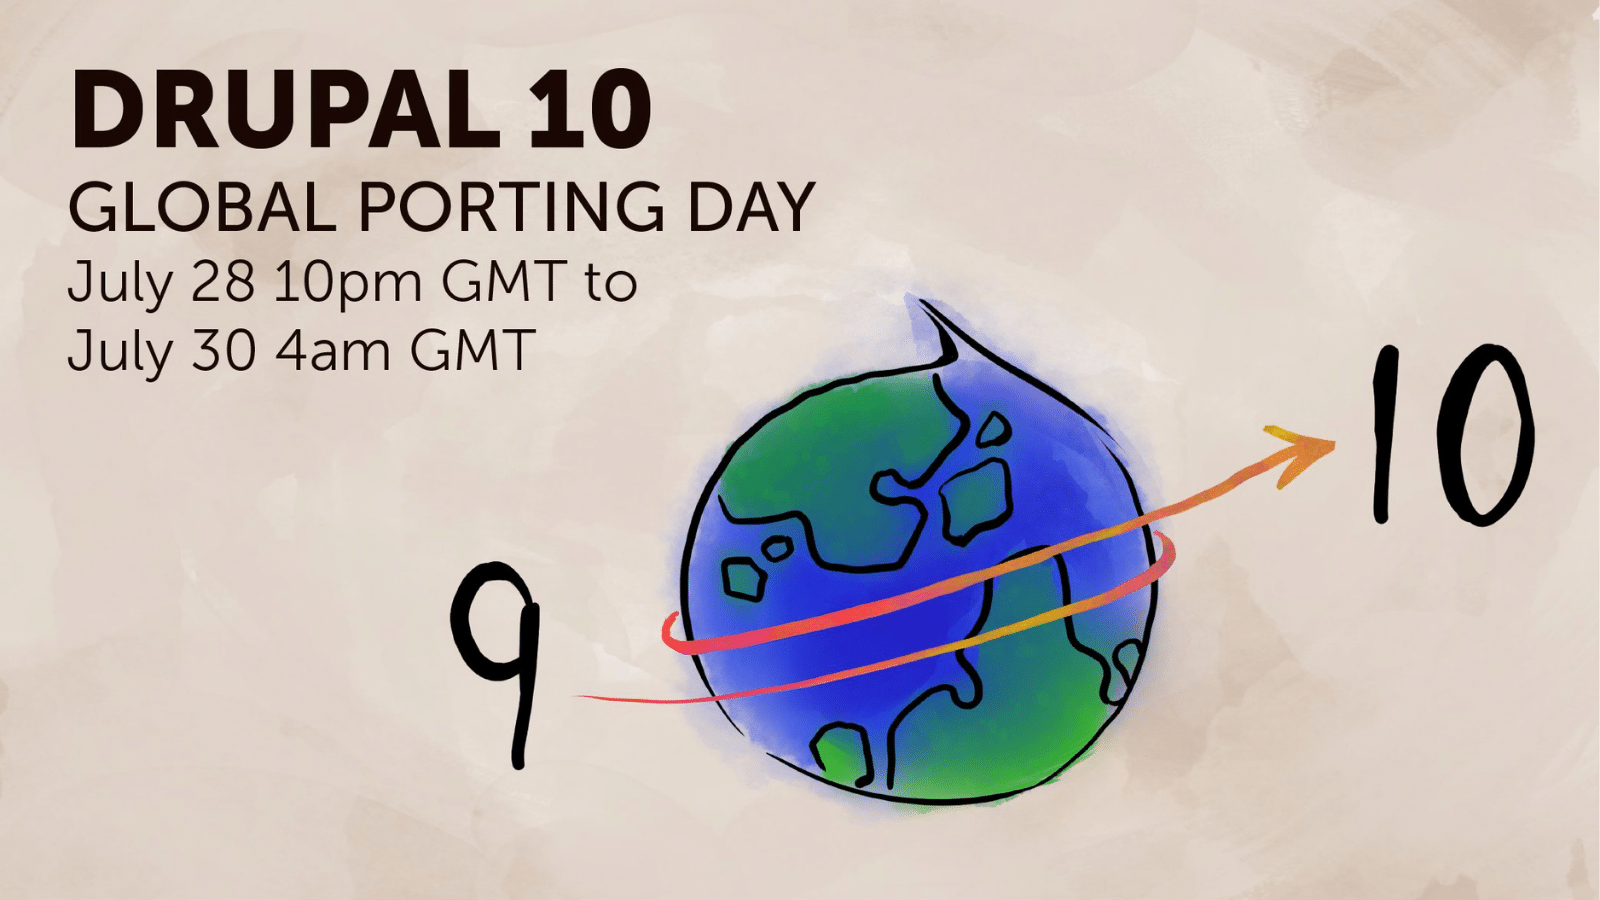 Drupal 10 Global Porting Day - credit to @aaroningots